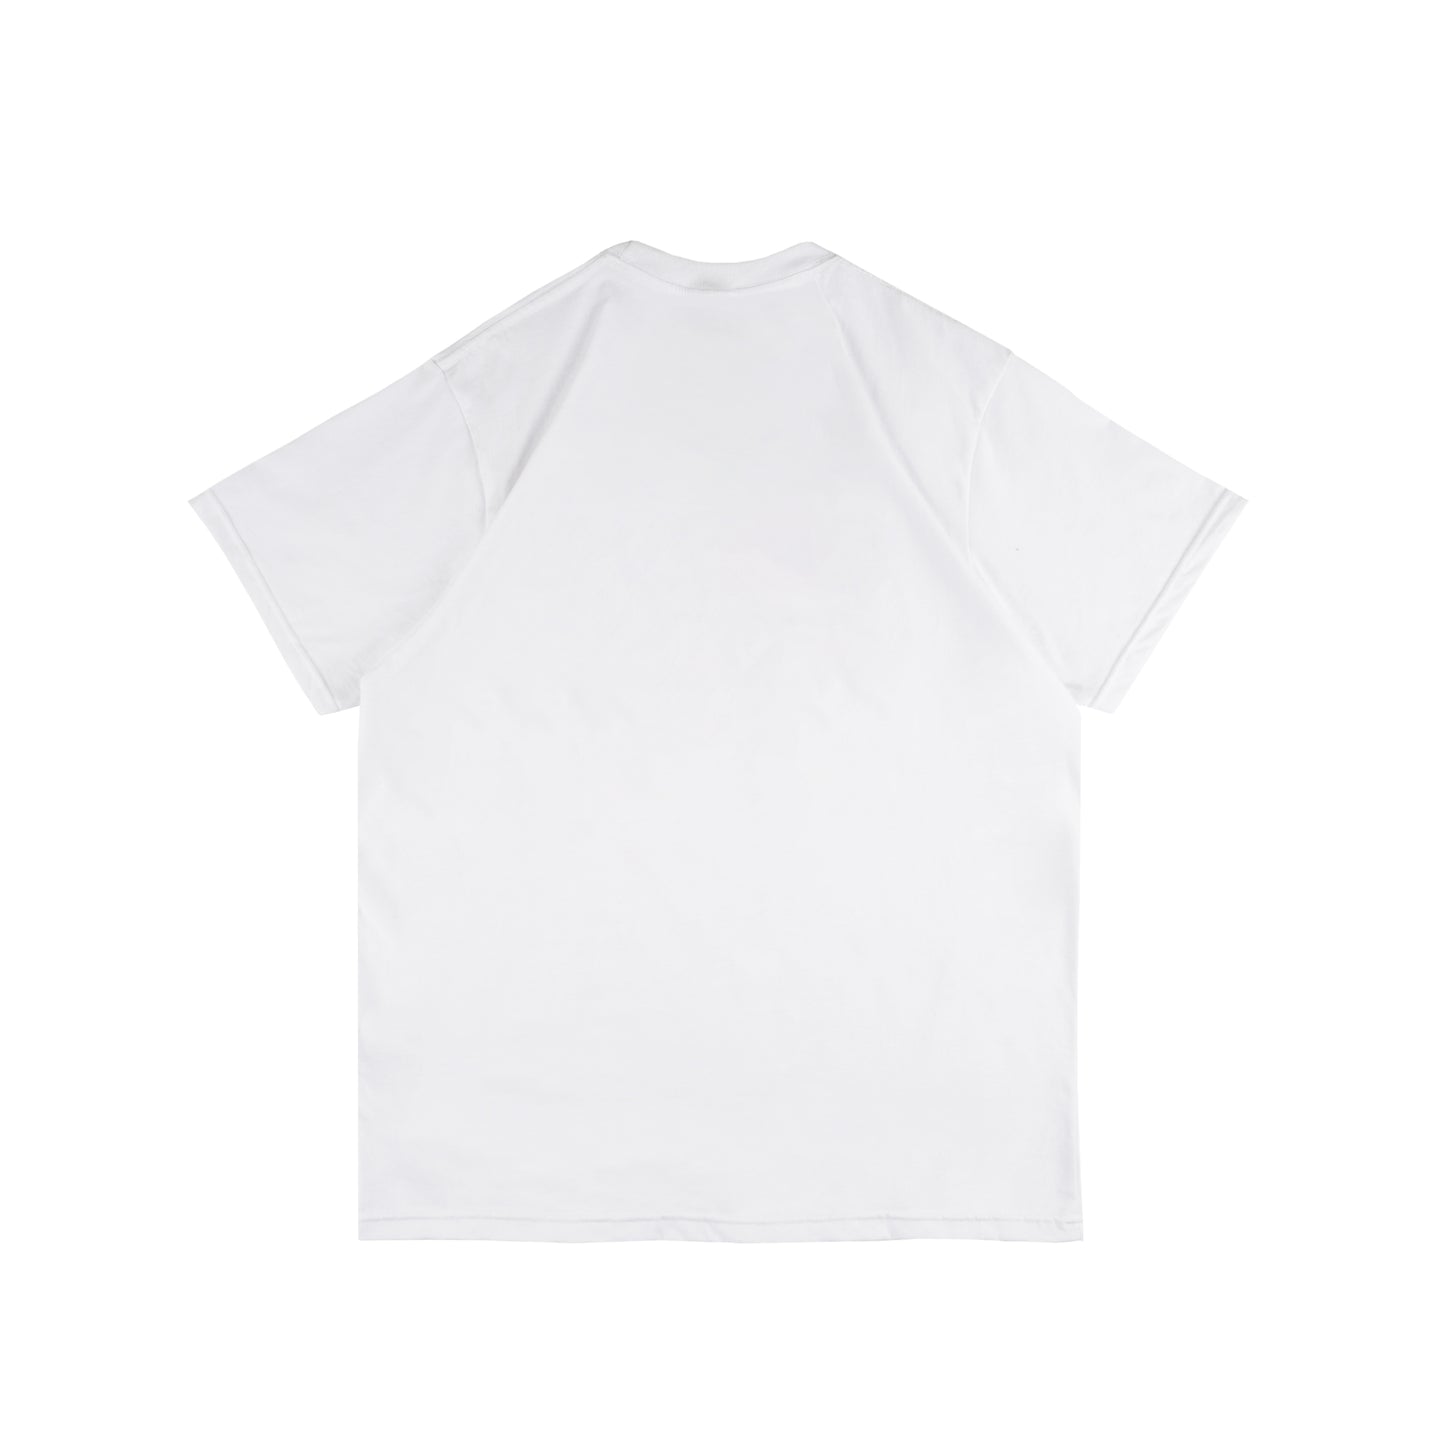 HLWD Skateboards ABSOLUTE STATE White Built To Last T-shirt